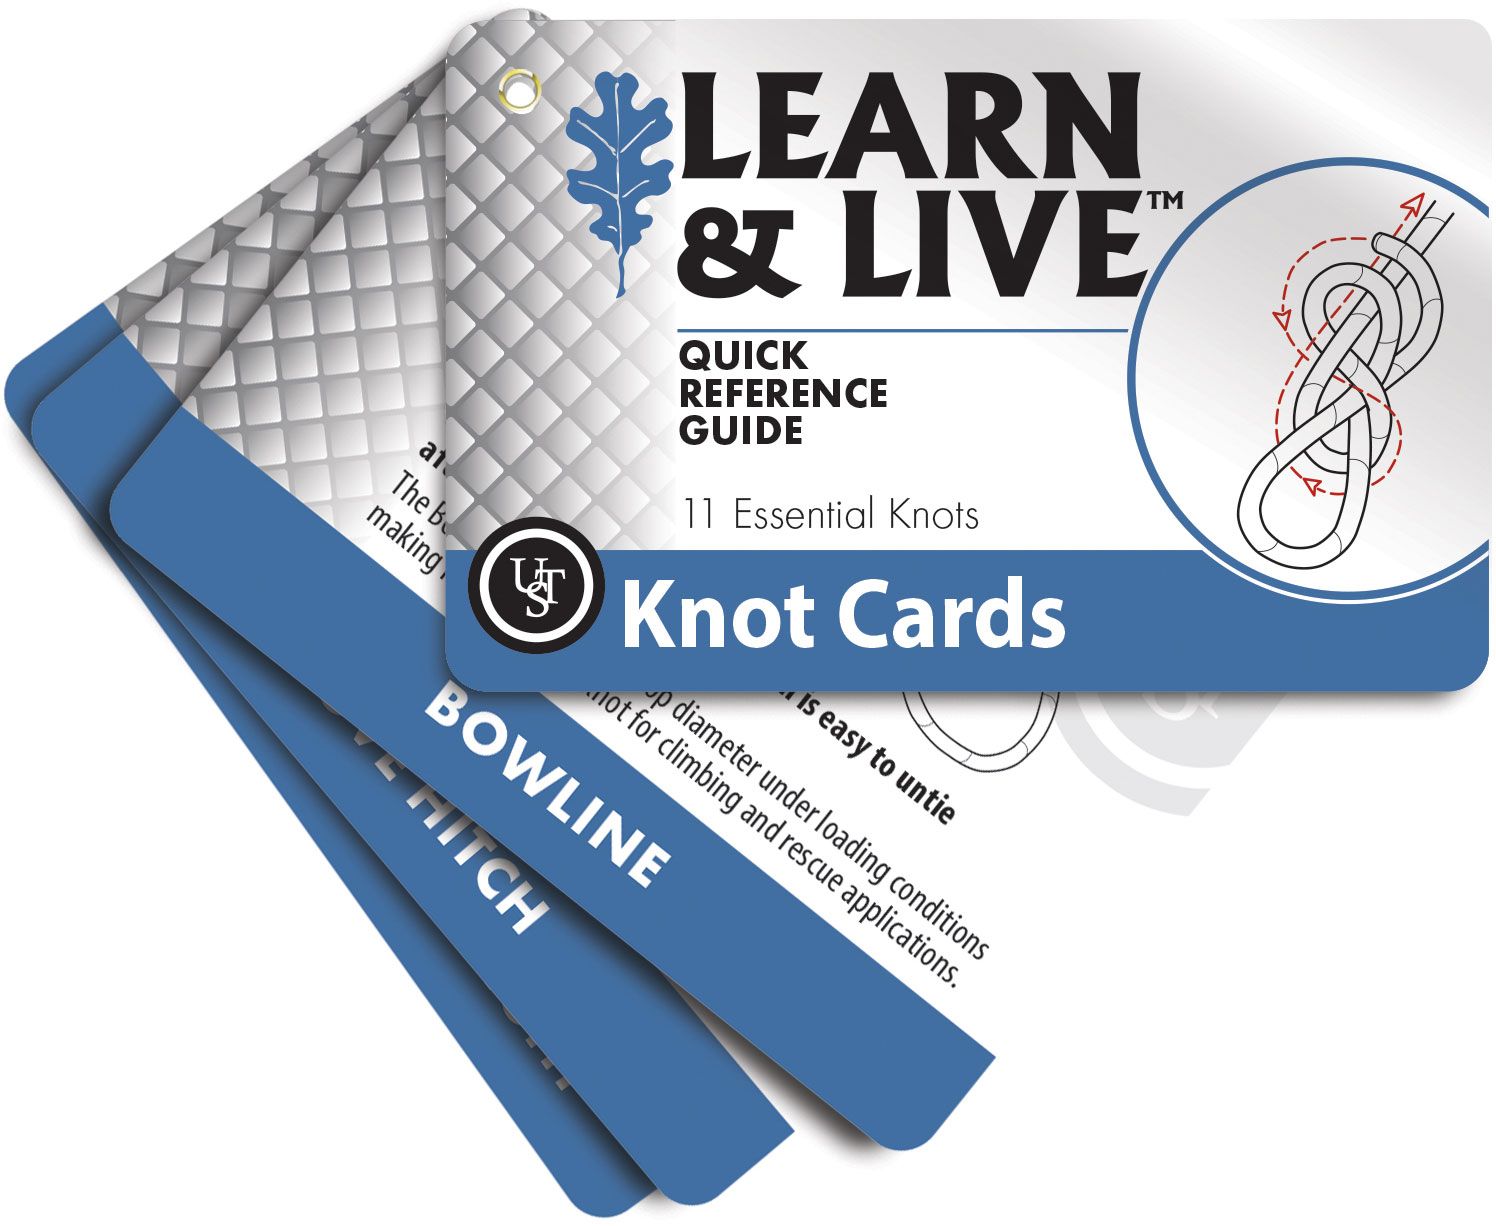 UST Learn & Live Educational Card Set Waterproof & Outdoor & Compact Design